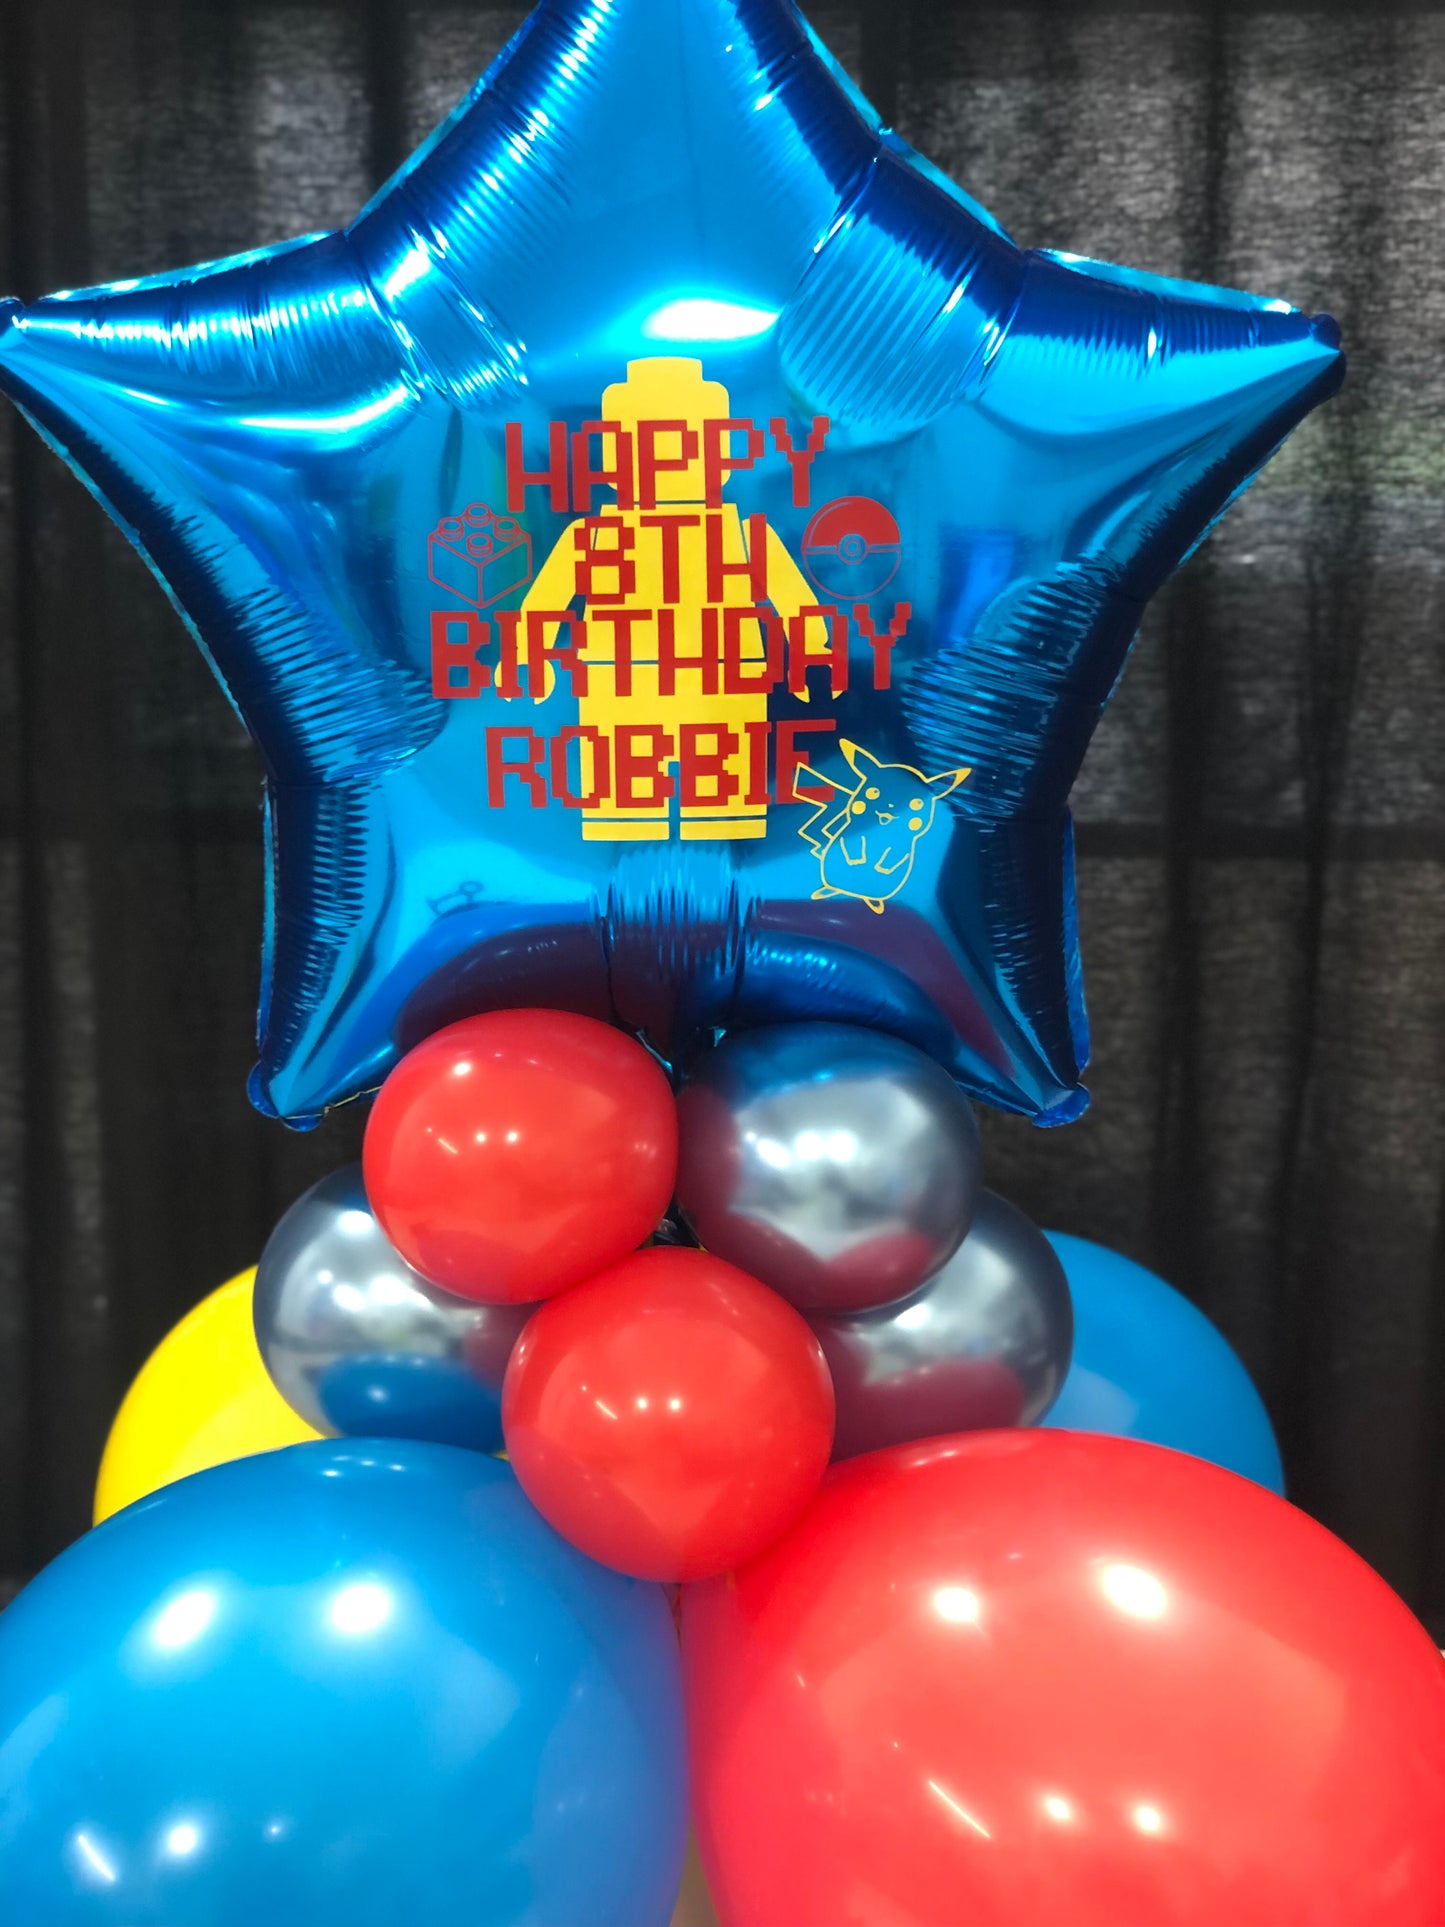 Personalized Party Balloon Centrepiece